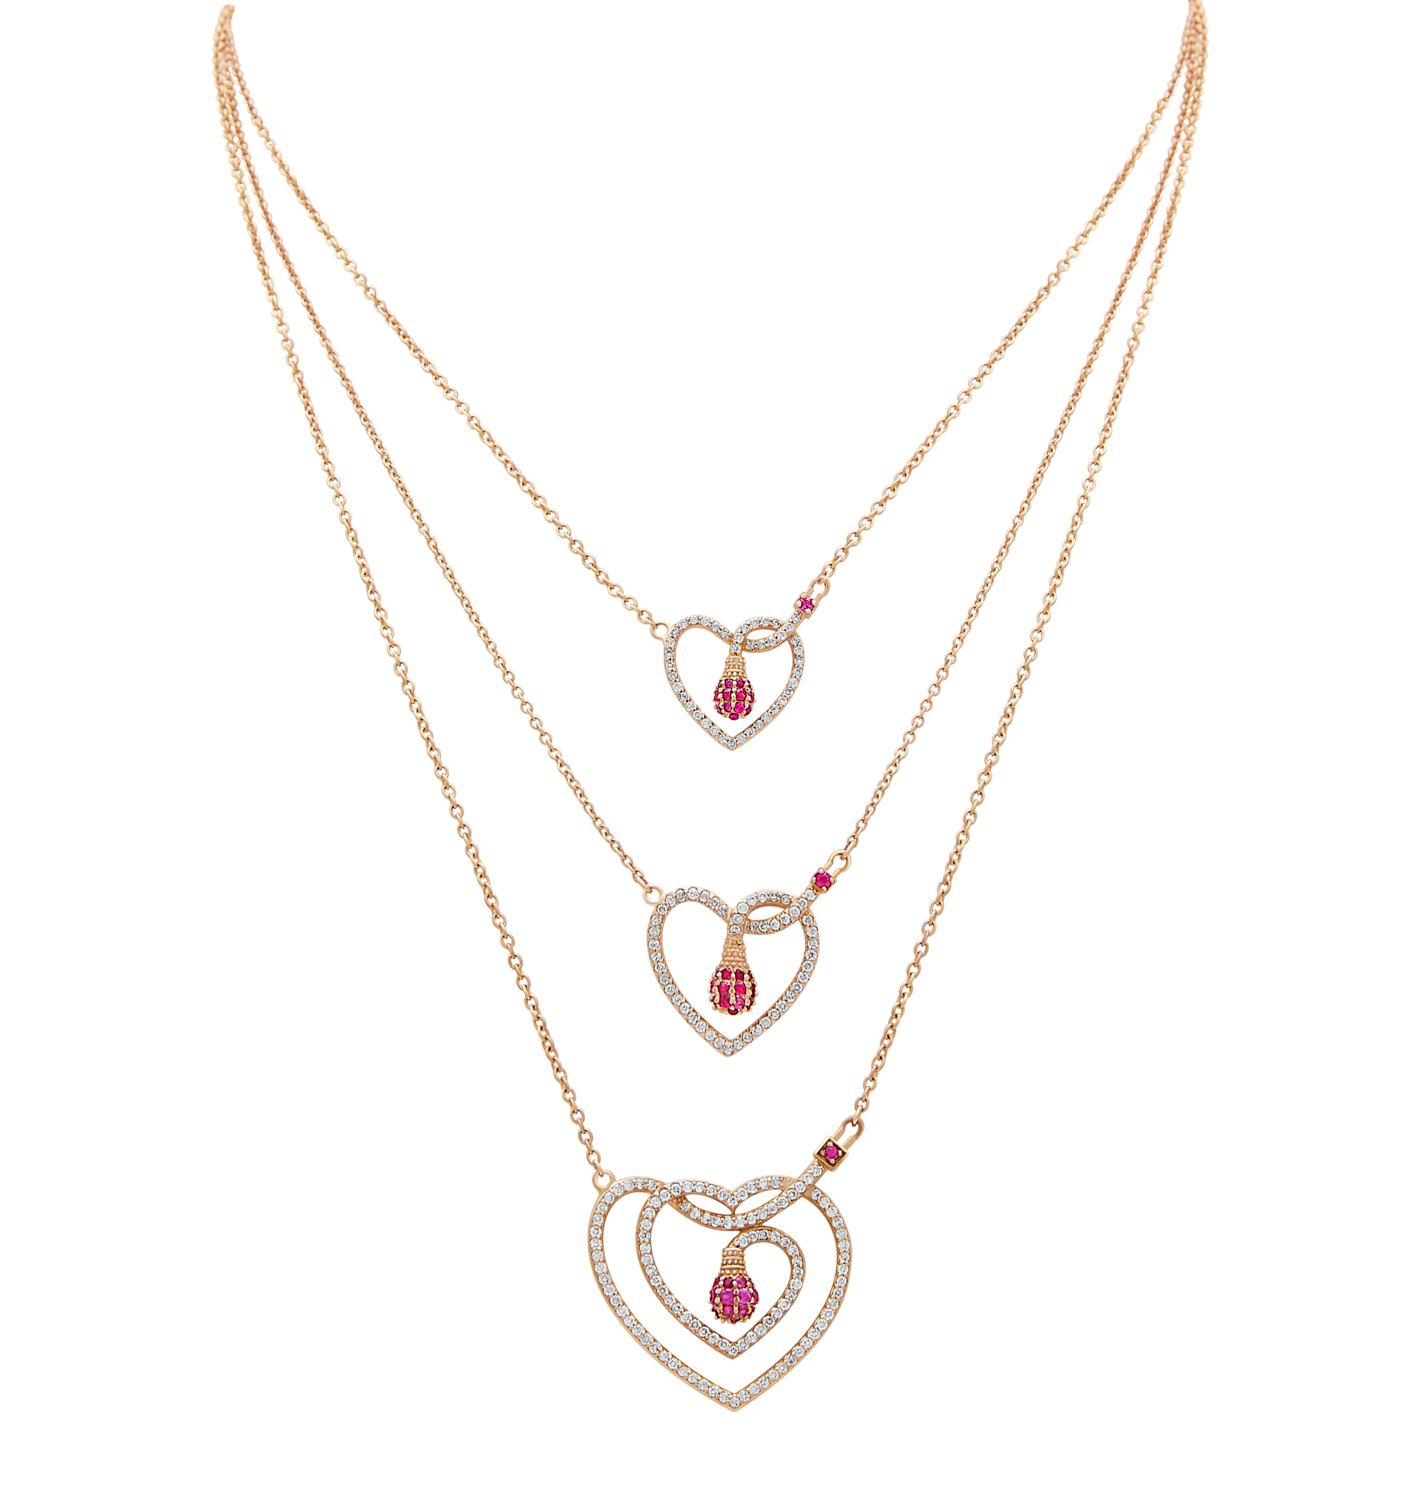 Light Diamond Necklace Love with Ruby